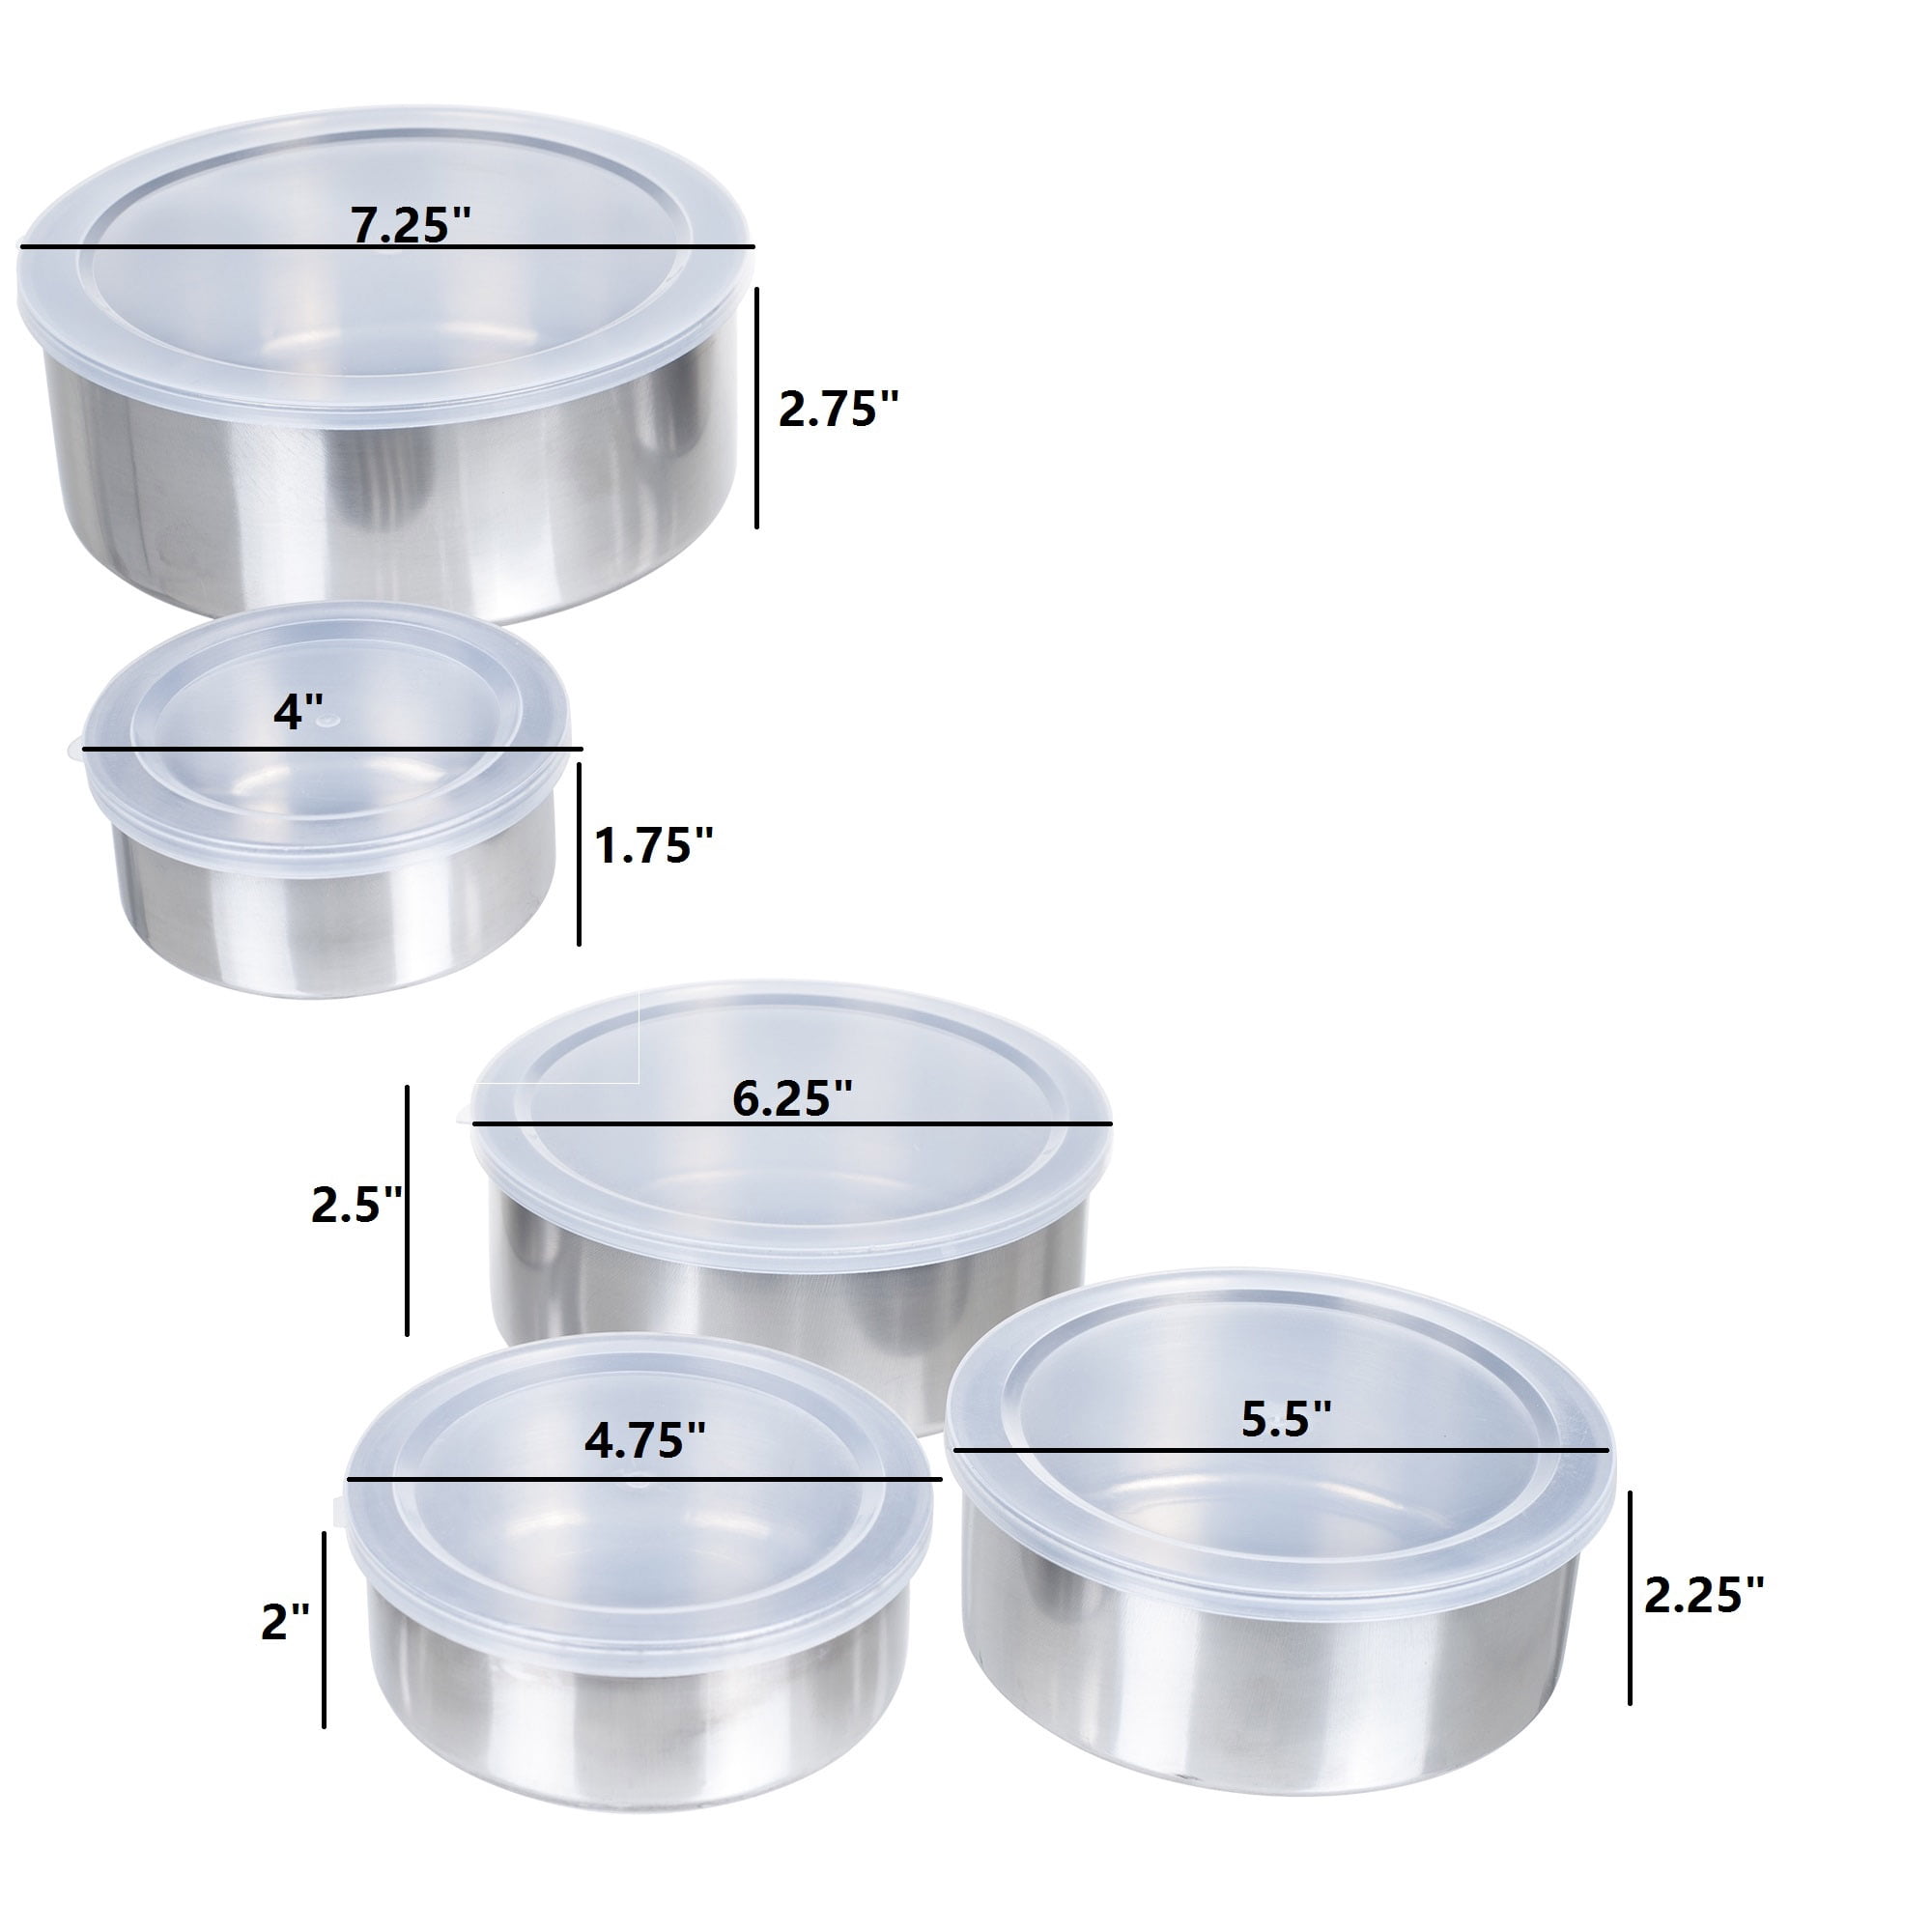 Set of 5 Meal Prep Stainless Steel Mixing Bowls Set - On Sale - Bed Bath &  Beyond - 32959959